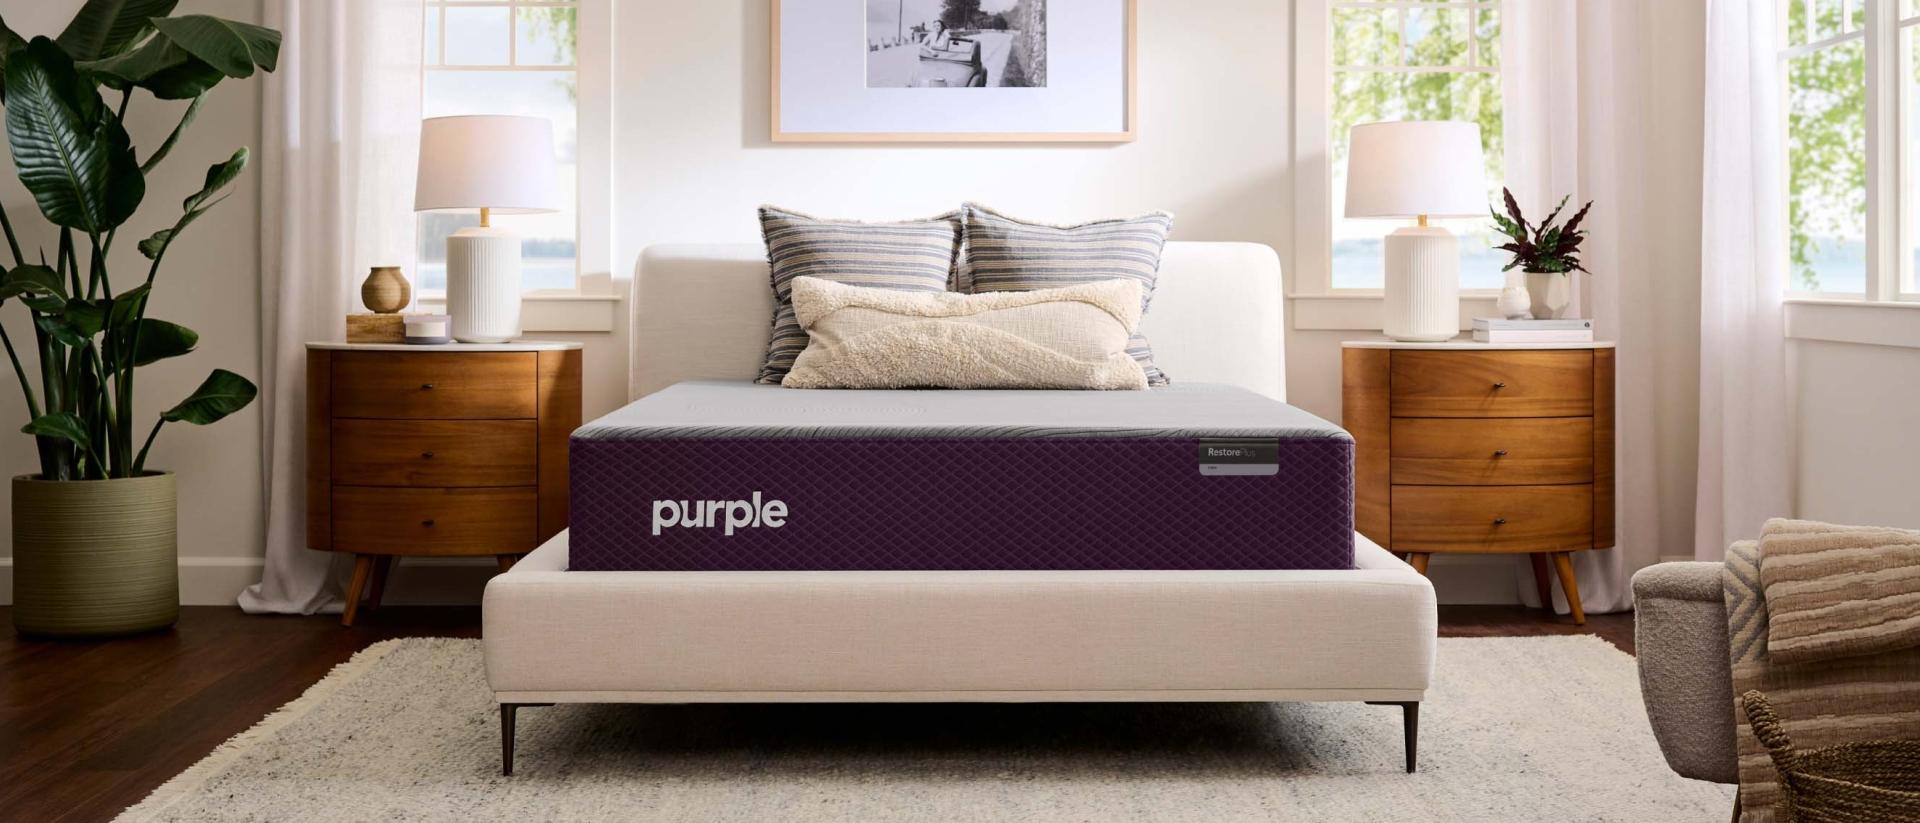 The Purple RestorePlus™ mattress on a cream upholstered bed frame between two wood nightstands in a bright bedroom.